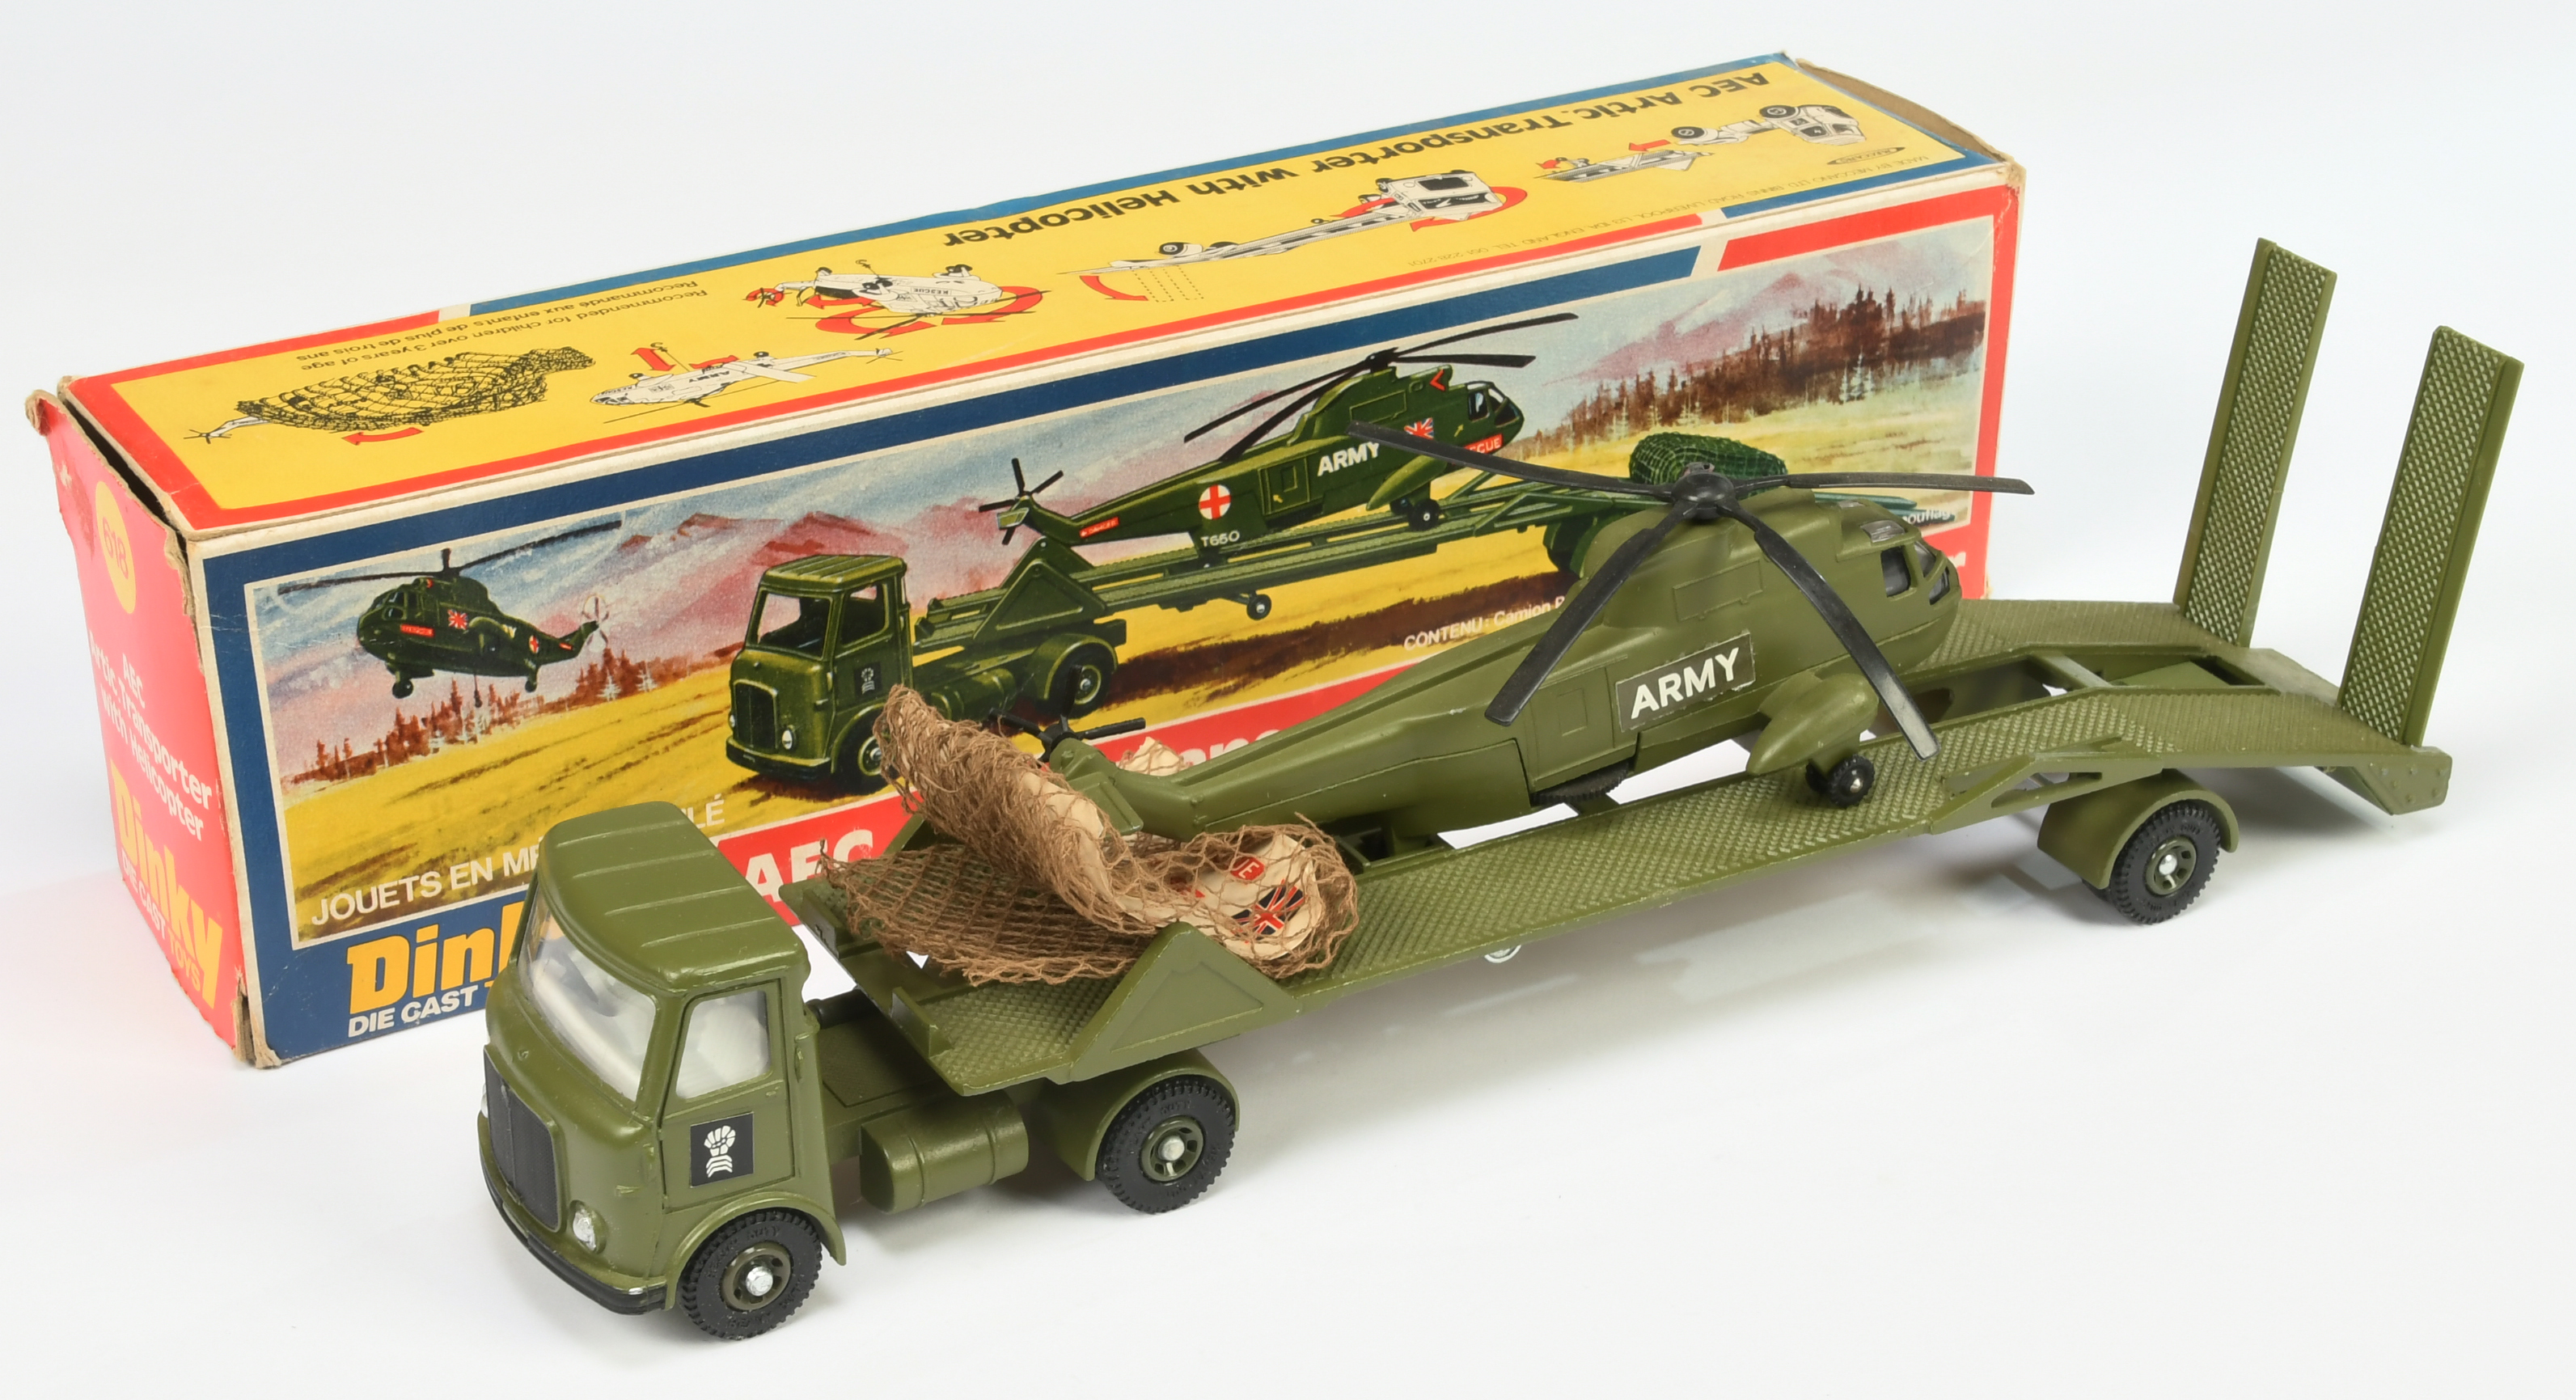 Dinky Toys 618 Military AEC Articulated Truck and Trailer - Green, pale grey interior, plastic hu...